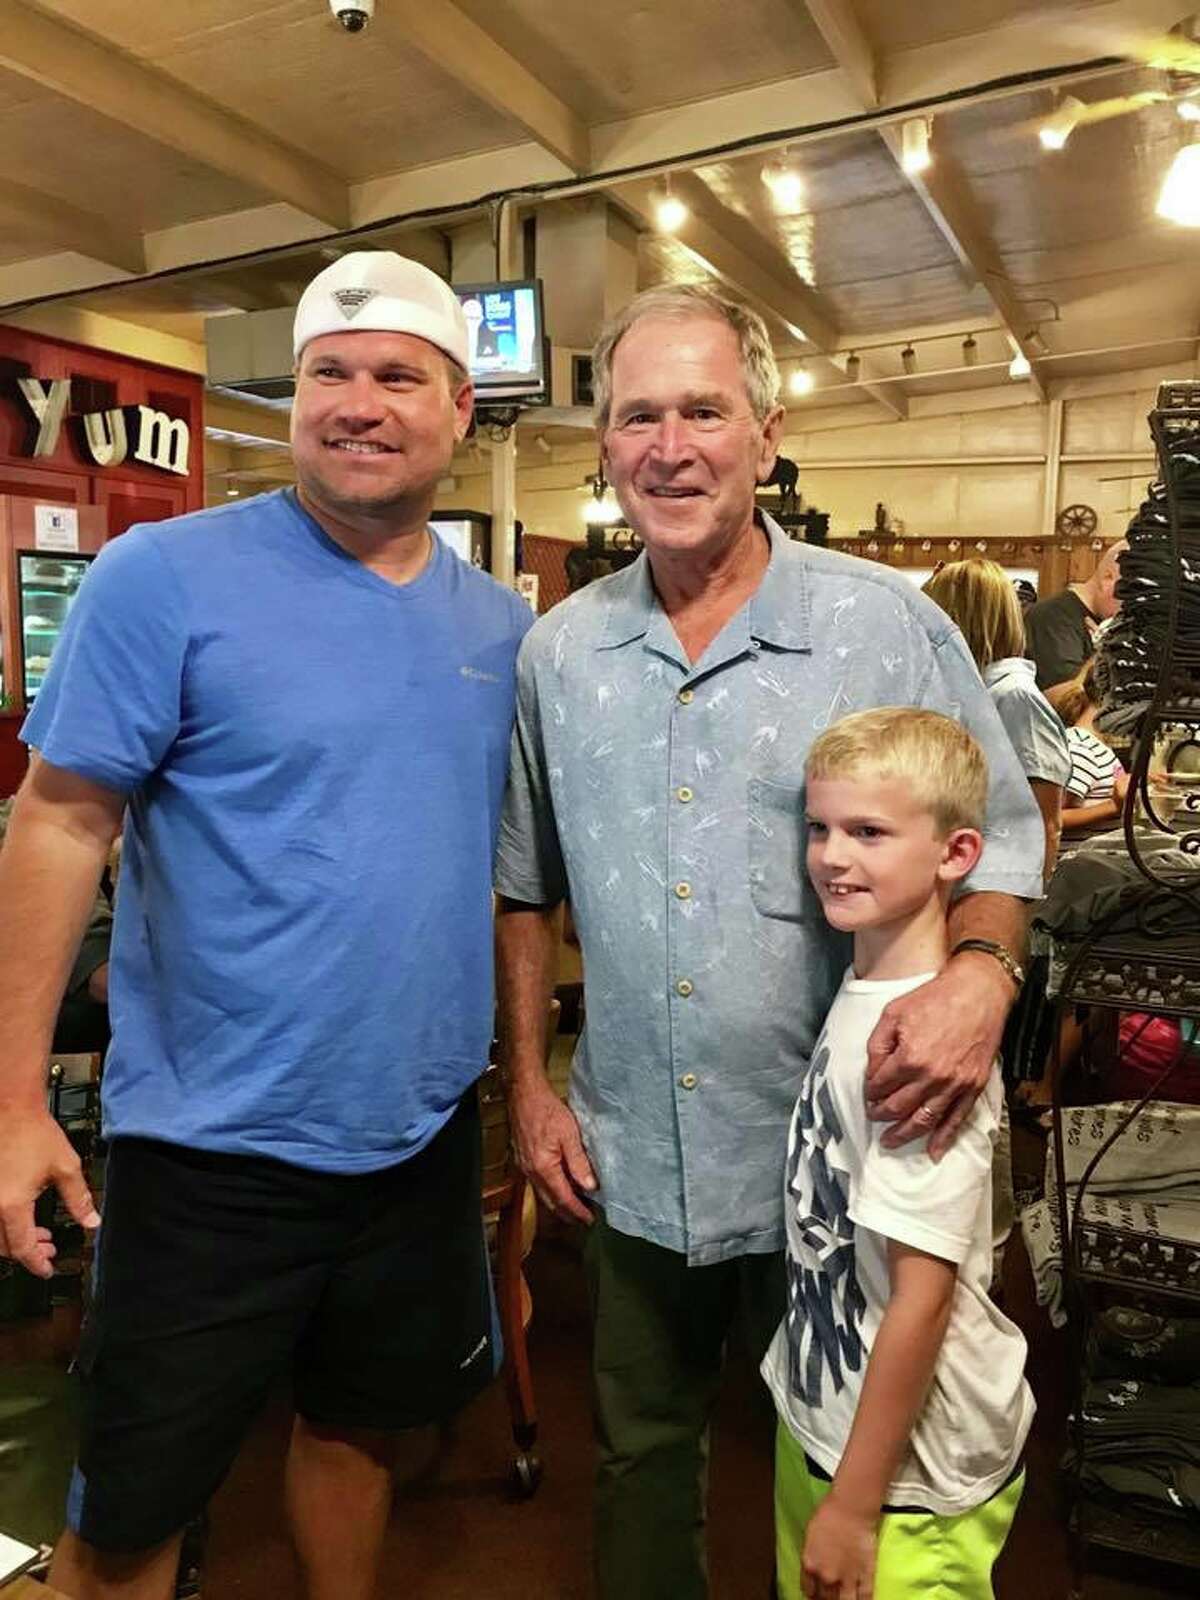 President Bush and former first lady, Laura Bush, chatted with the guests of Coffee Shop Cafe in McGregor following a surprise visit.